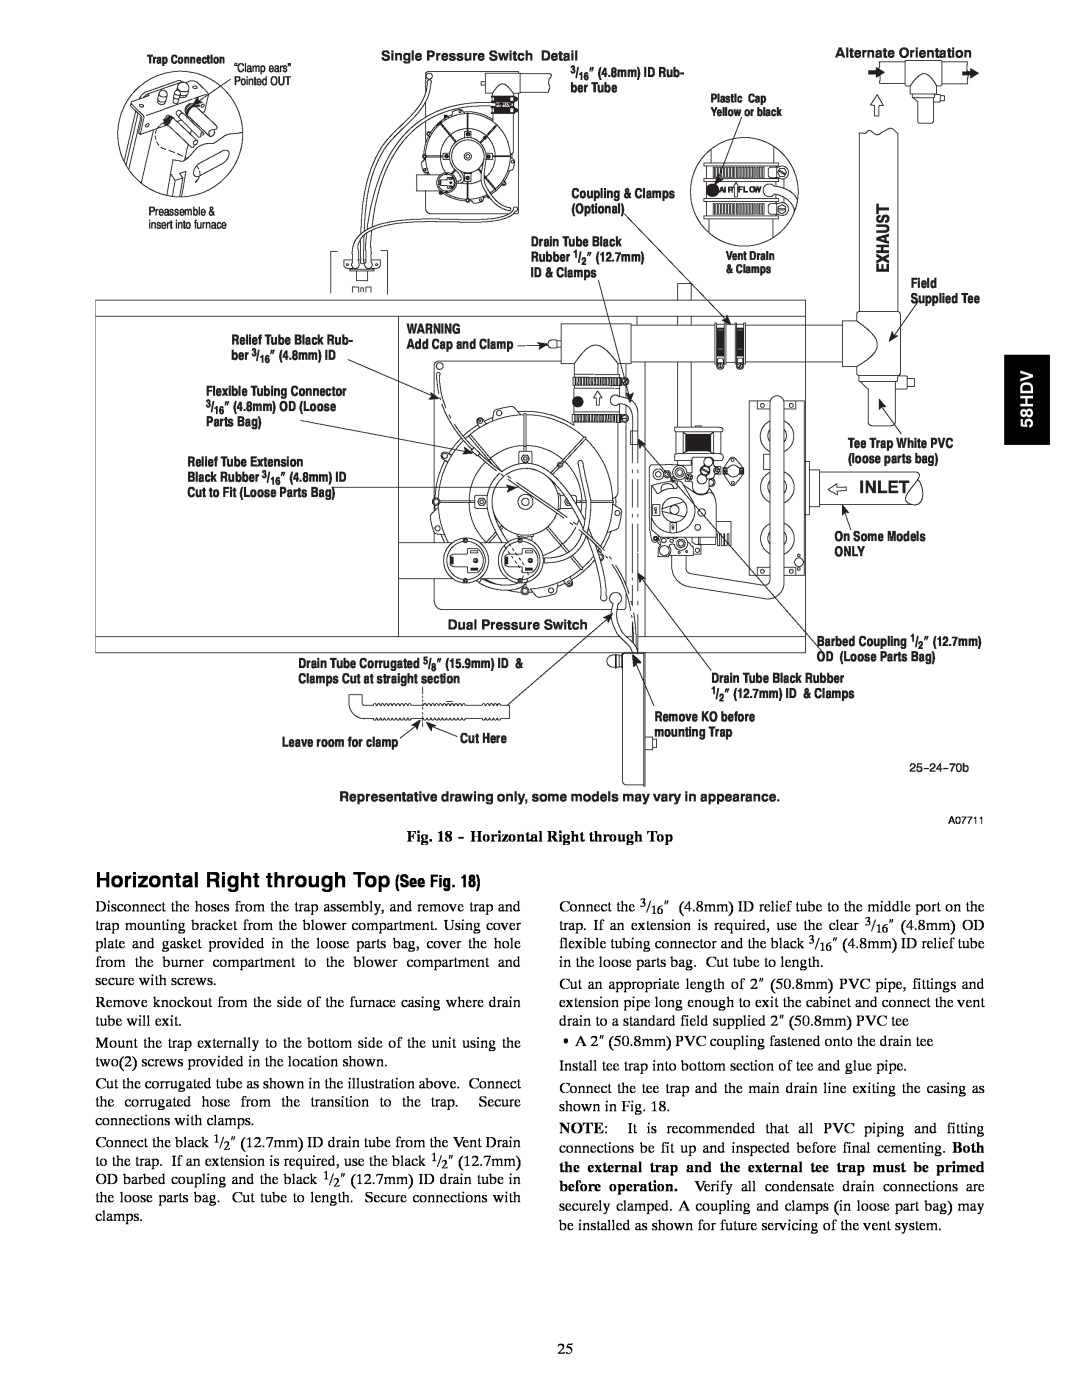 Carrier 58HDV installation instructions Horizontal Right through Top See Fig, Exhaust, Inlet 